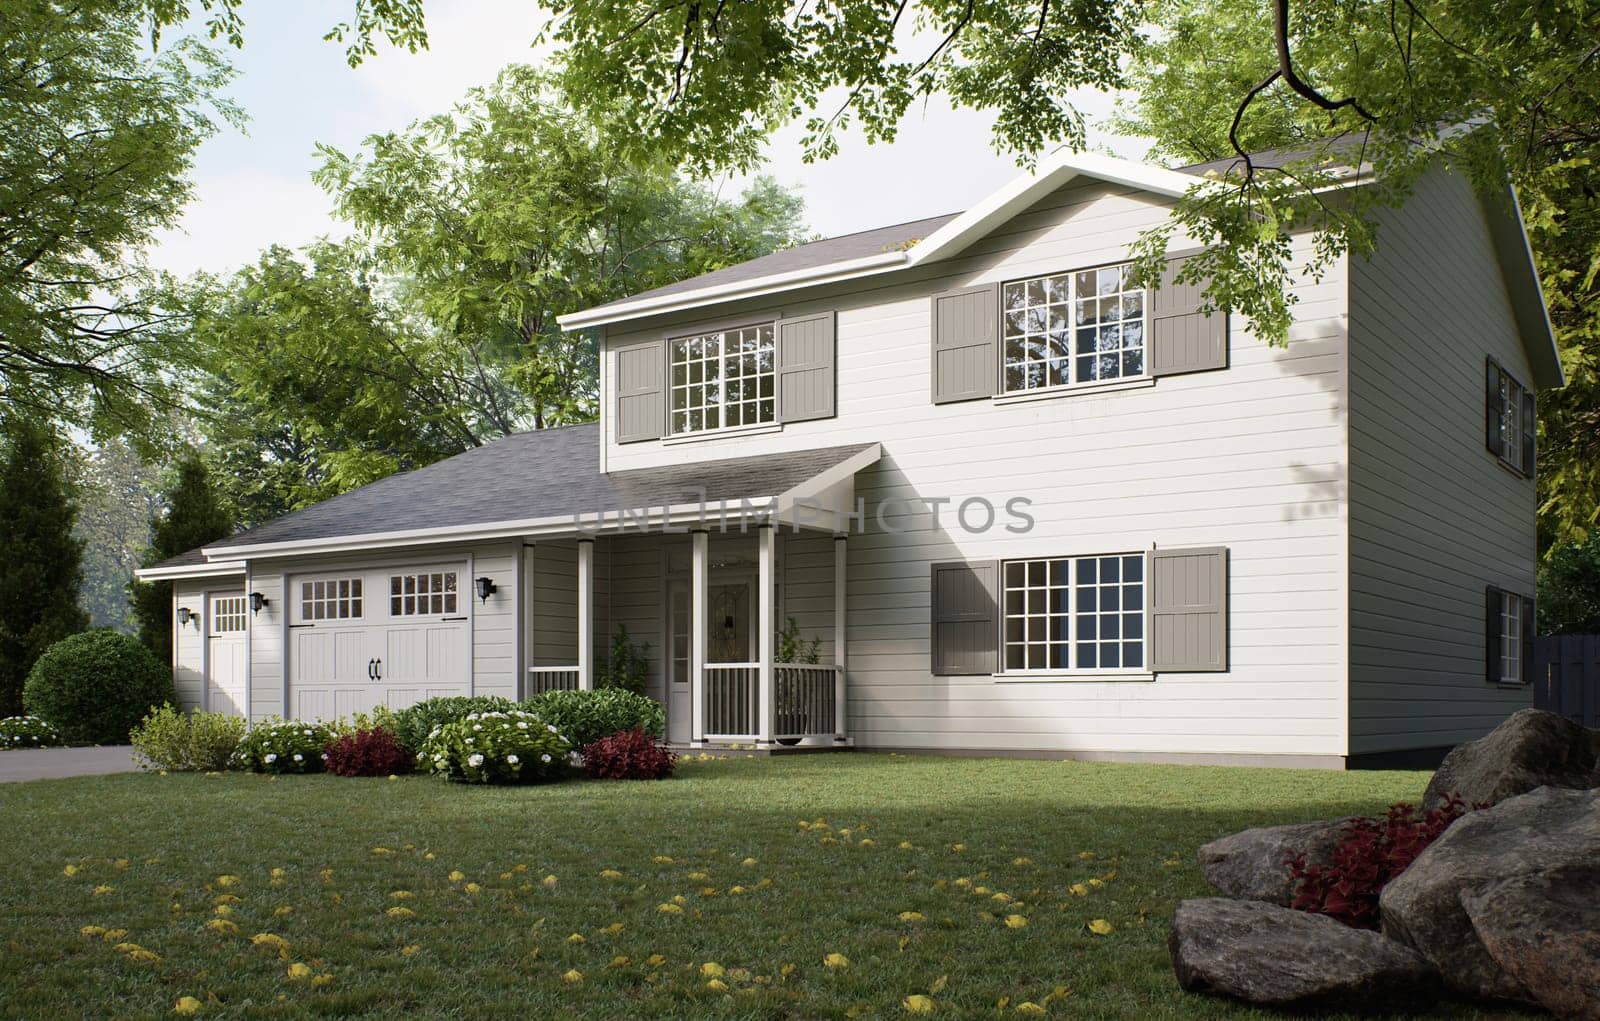 Traditional American home with two garages, a driveway and a large tree. by N_Design